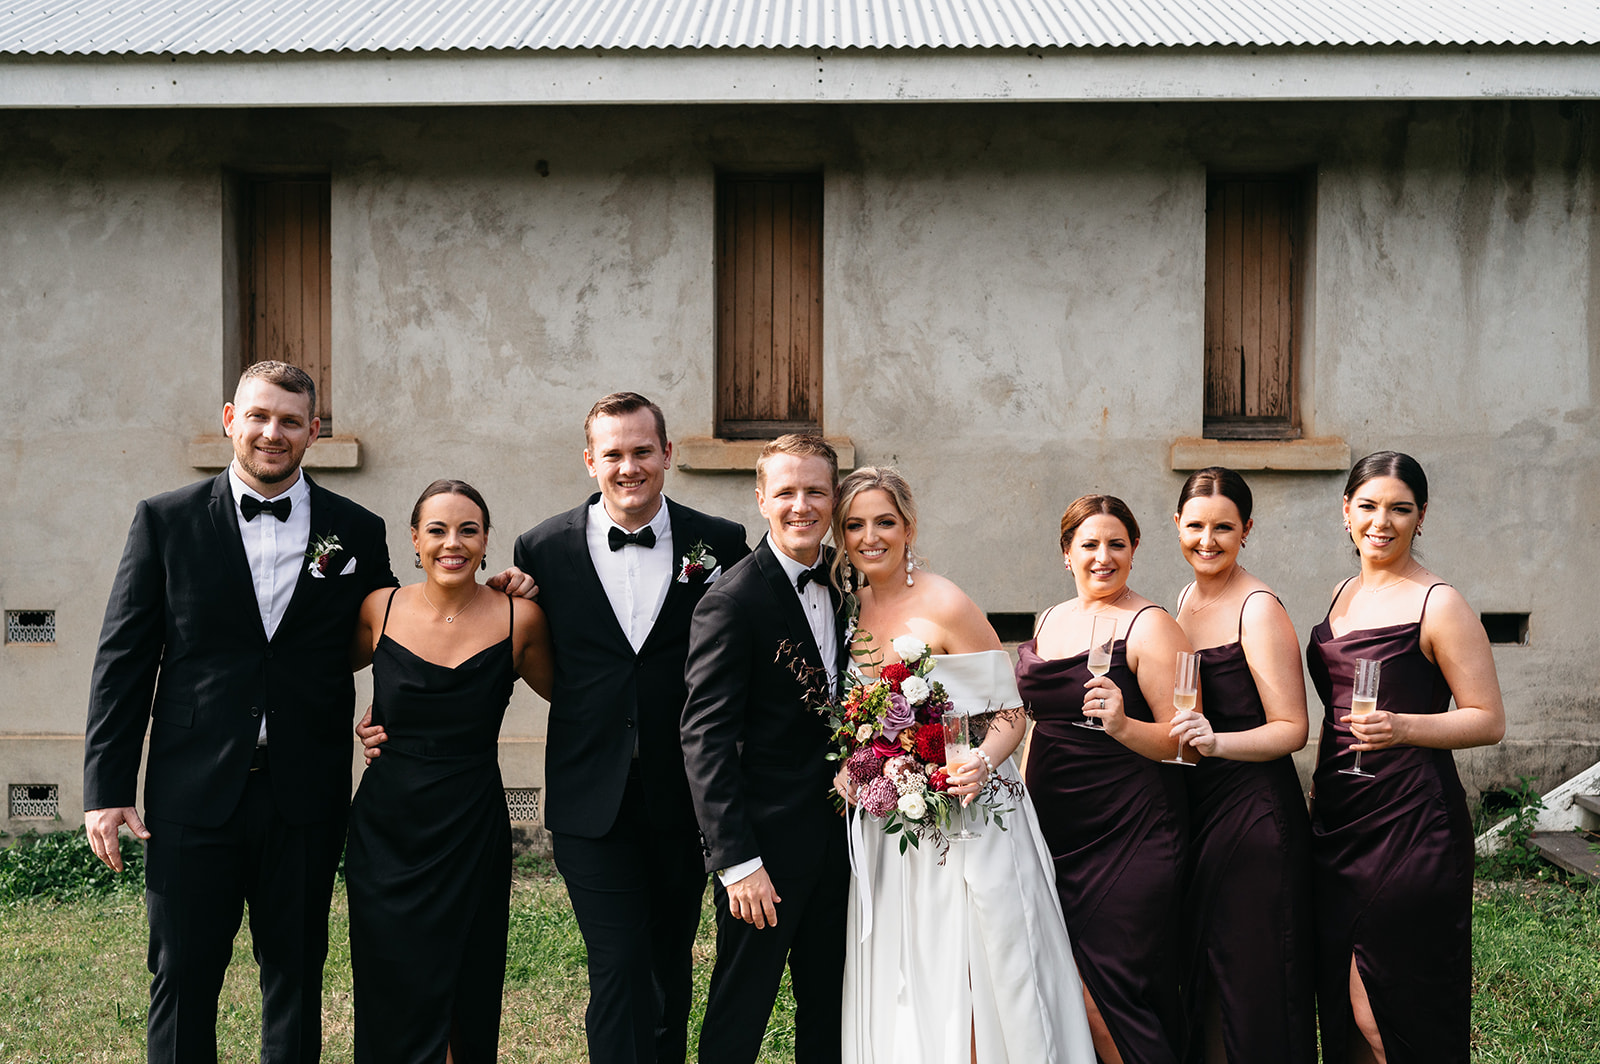 Bridal party photos in Cairns and celebrating with bride and groom